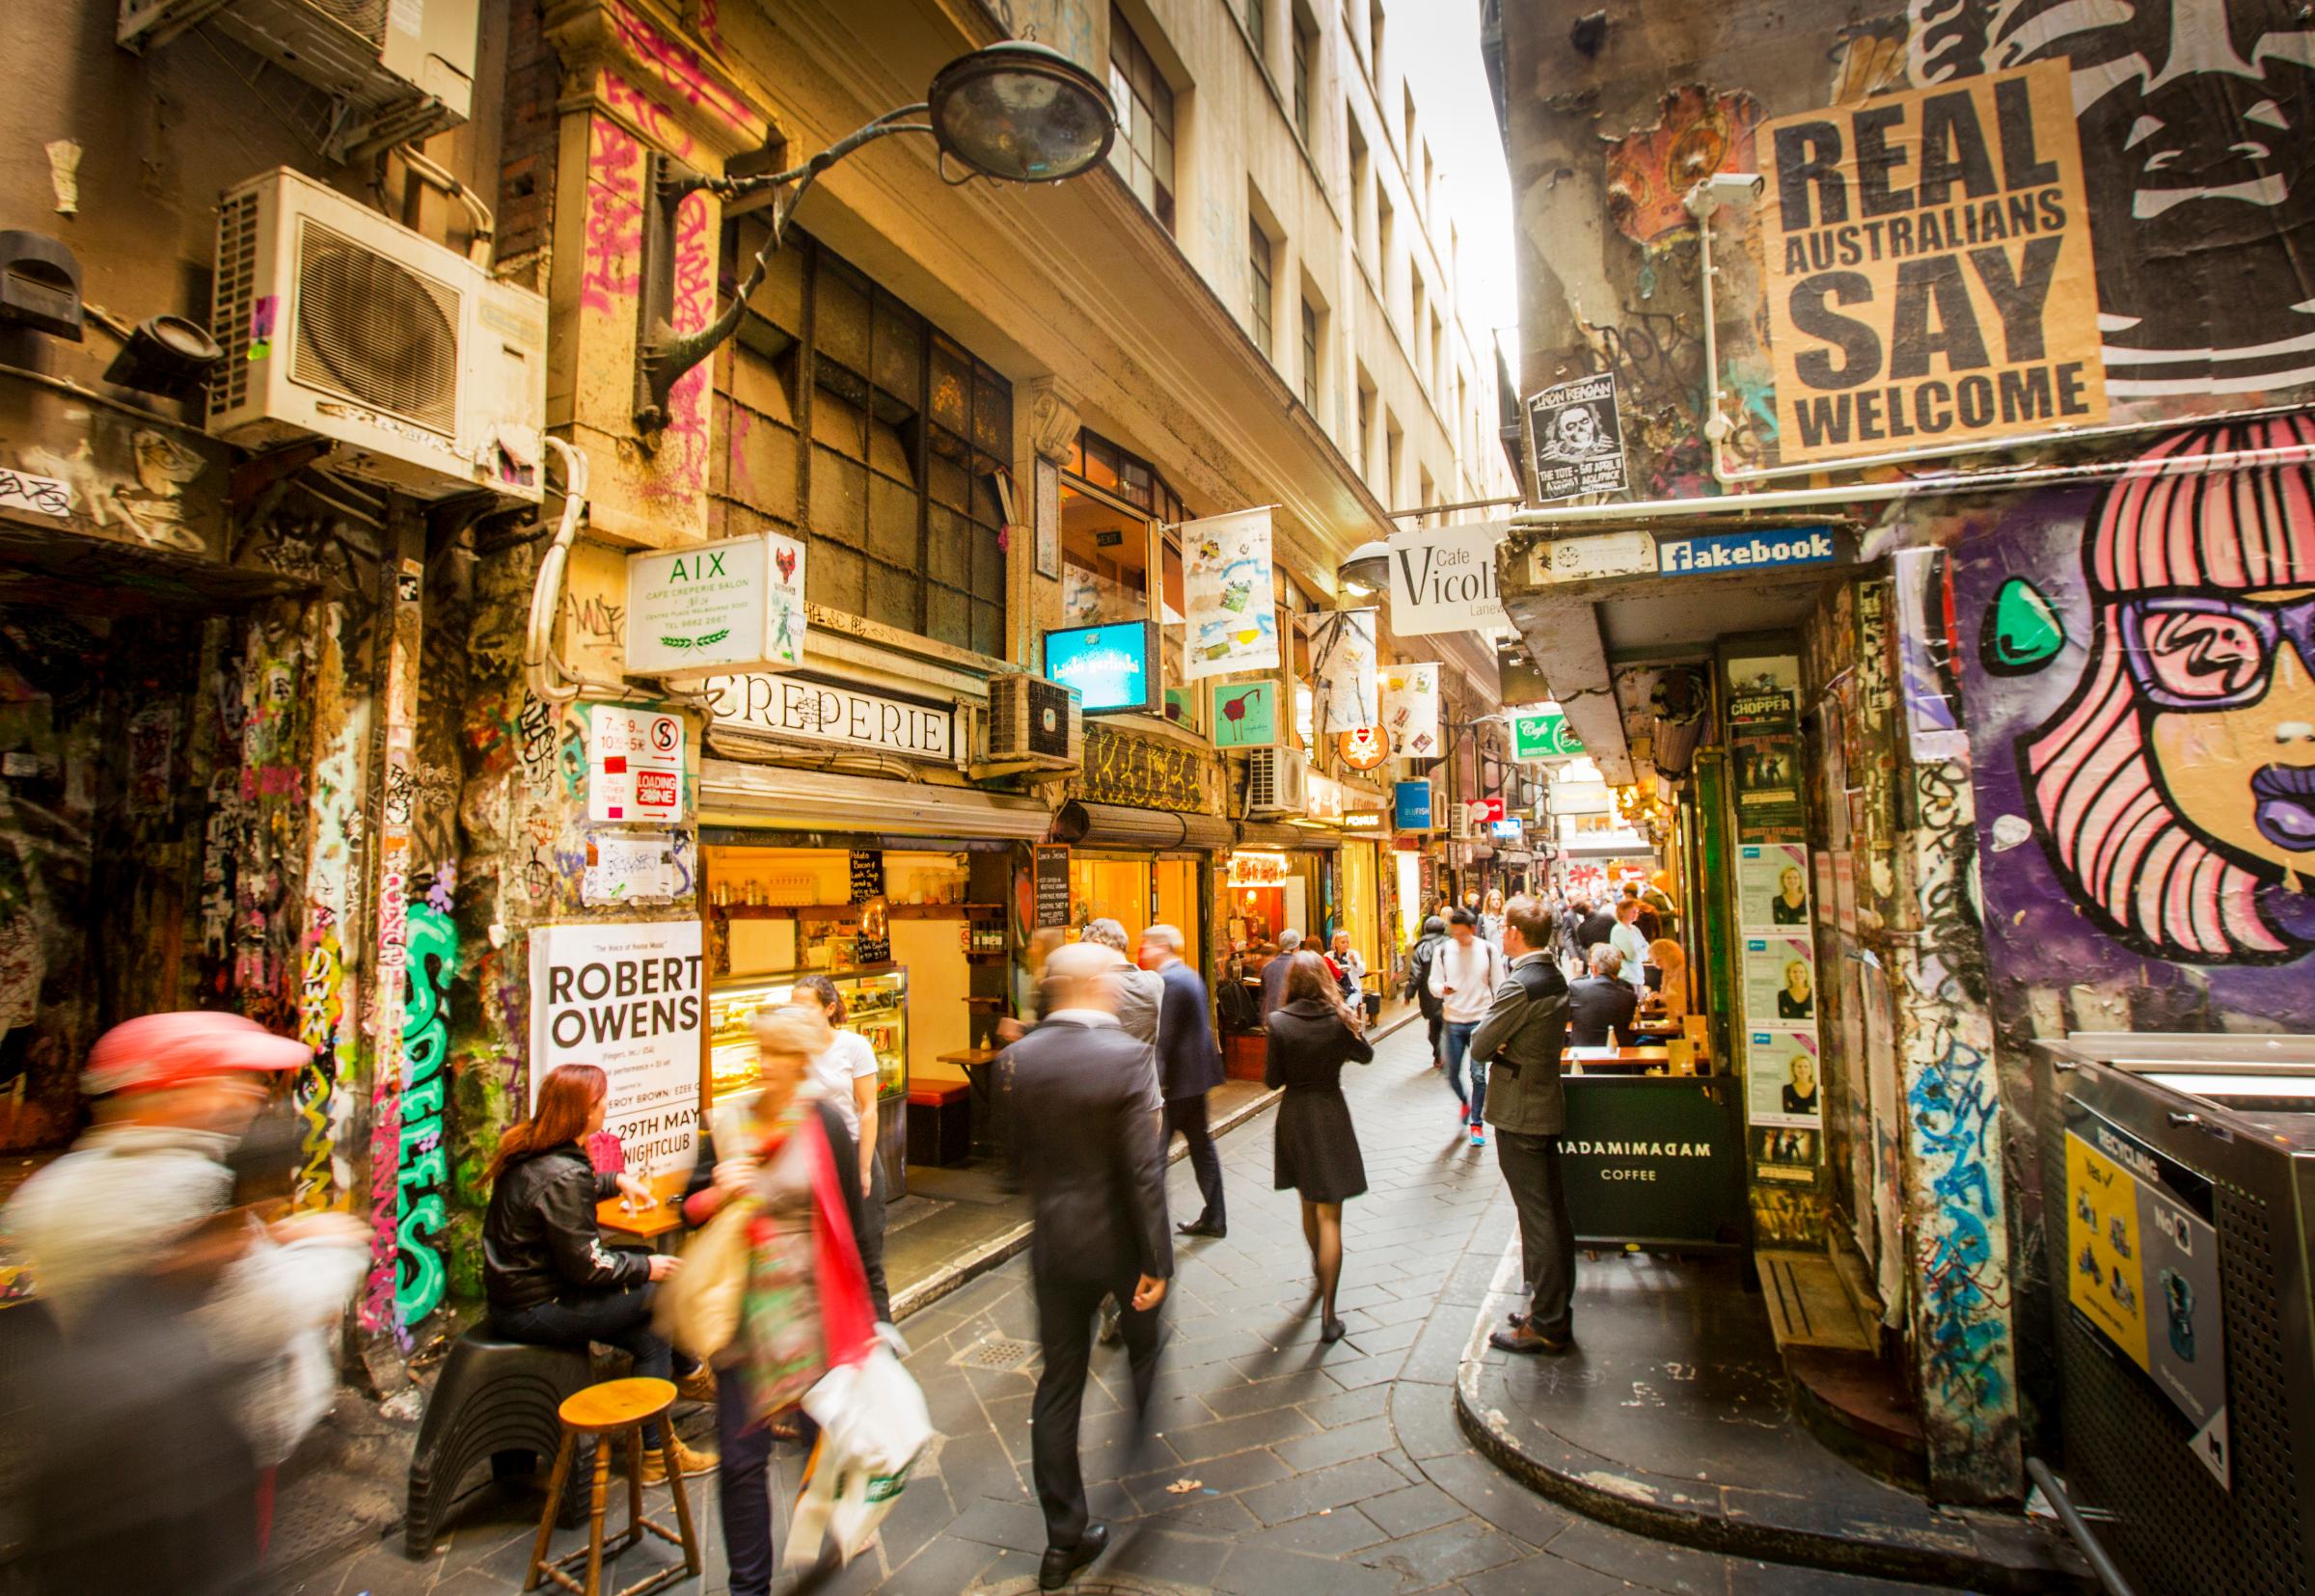 Cafes and people in laneways